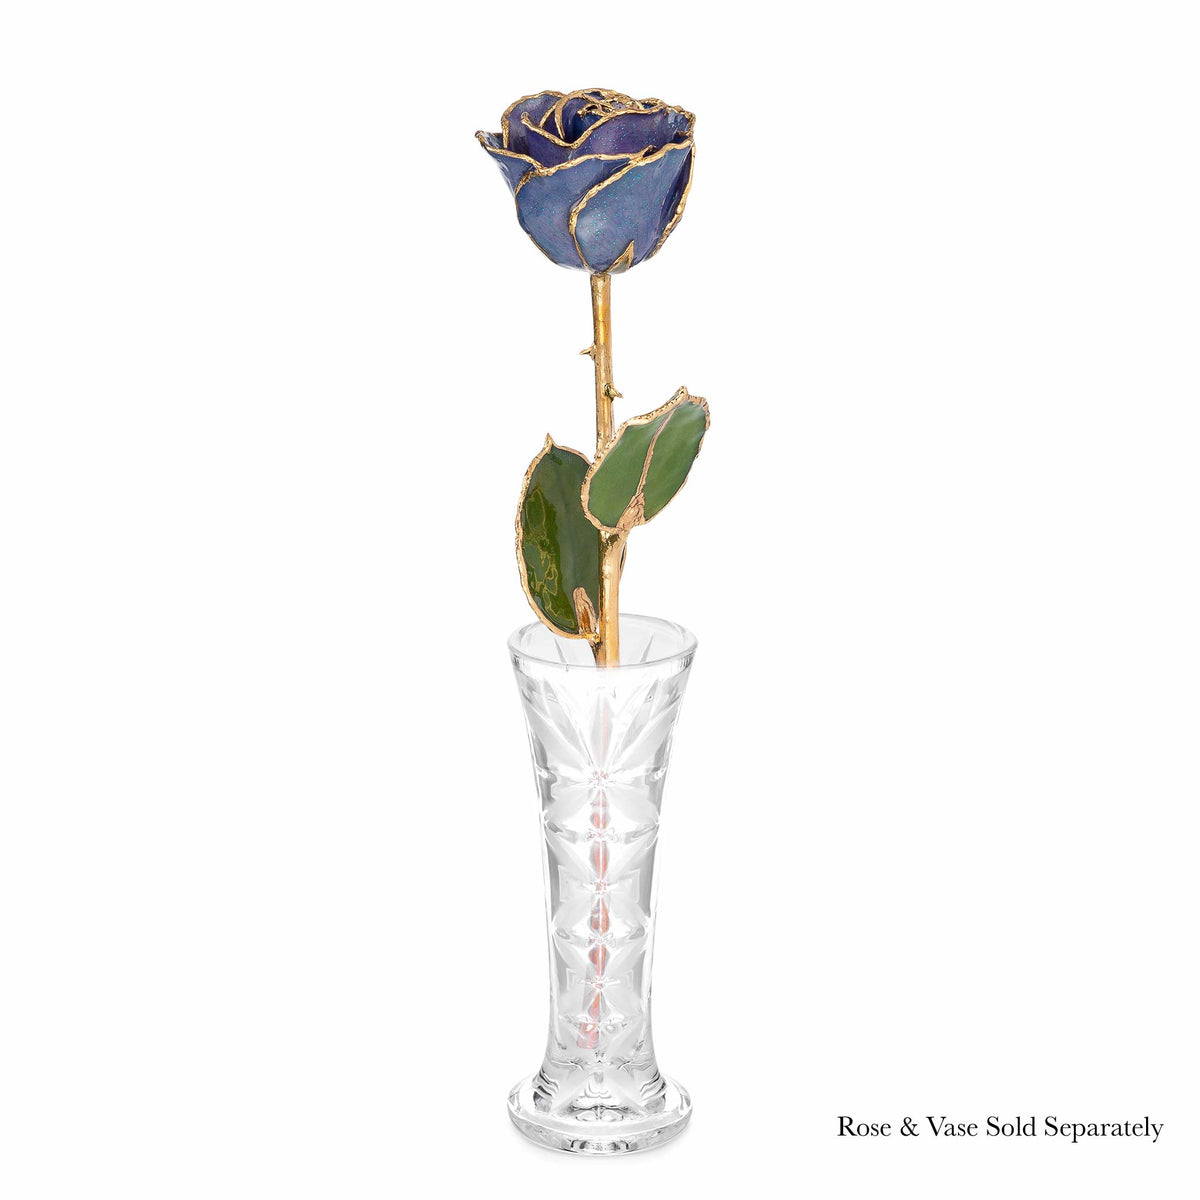 24K Gold Trimmed Forever Rose with Tanzanite (Purple, Lavender, and Blue color blend) Petals with Sapphire Blue Suspended Sparkles. View of Stem, Leaves, and Rose Petals and Showing Detail of Gold Trim Shown with Optional Crystal Vase.